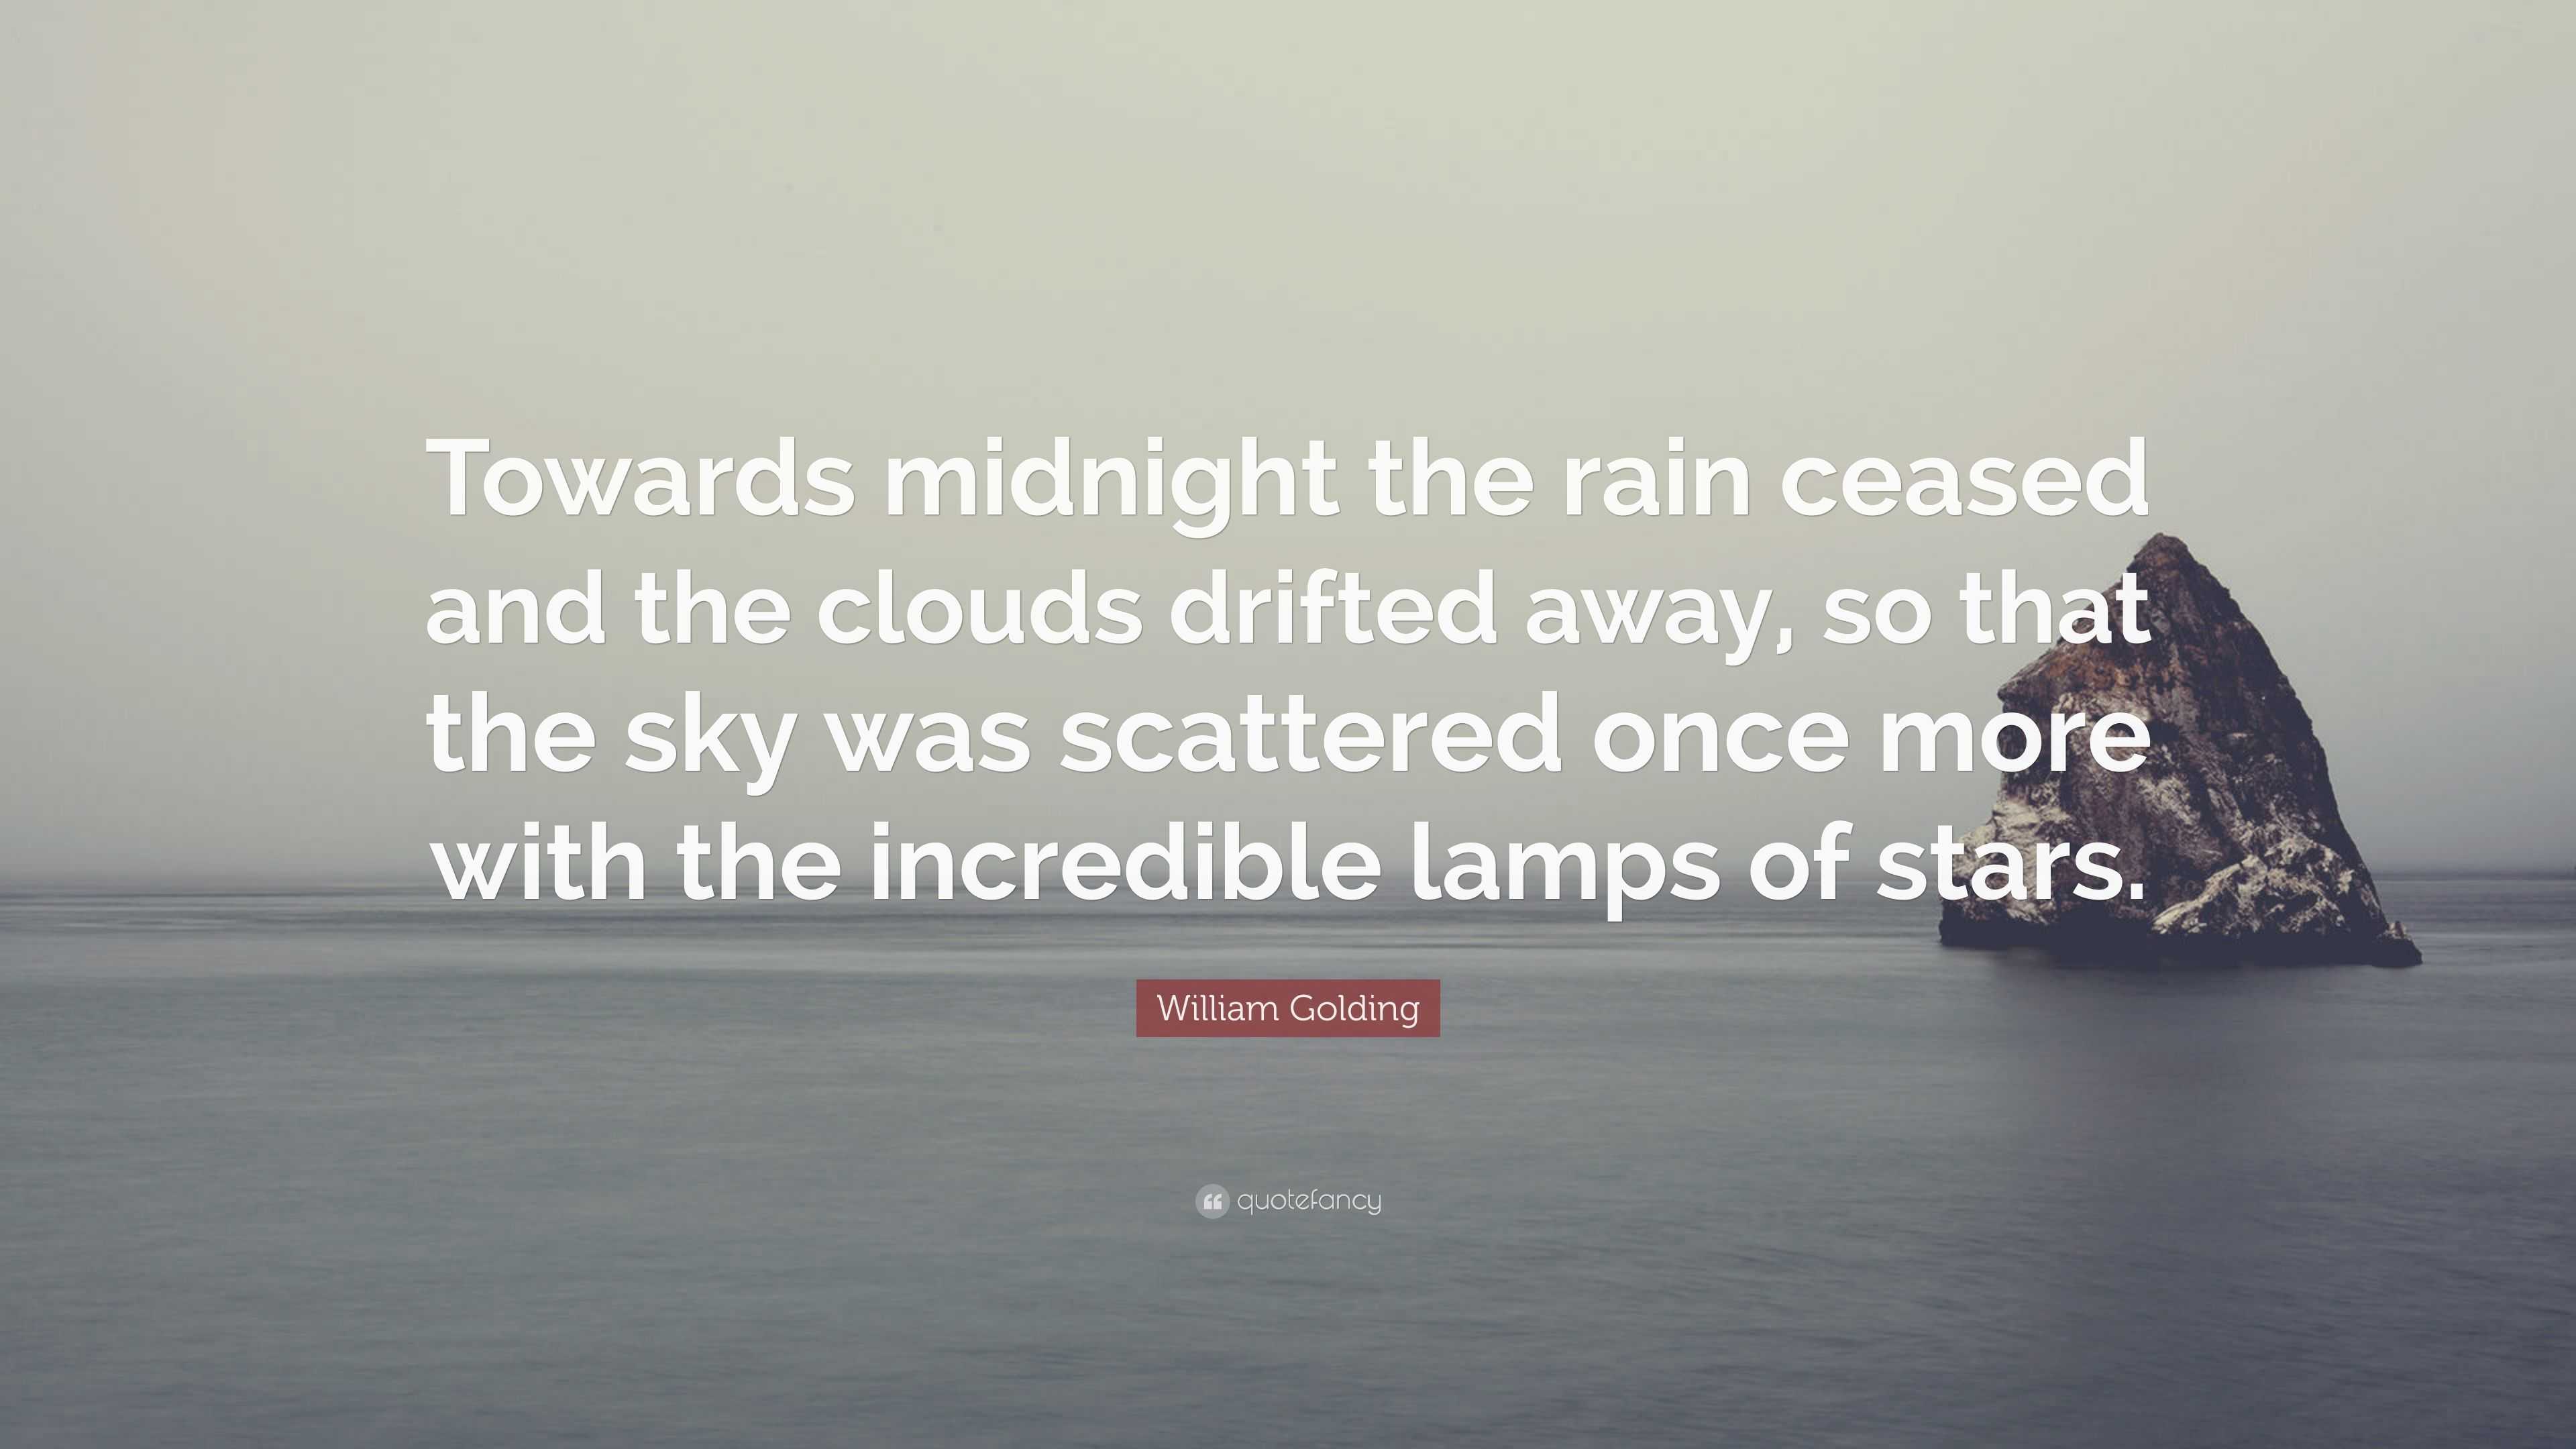 William Golding Quote “Towards midnight the rain ceased and the clouds